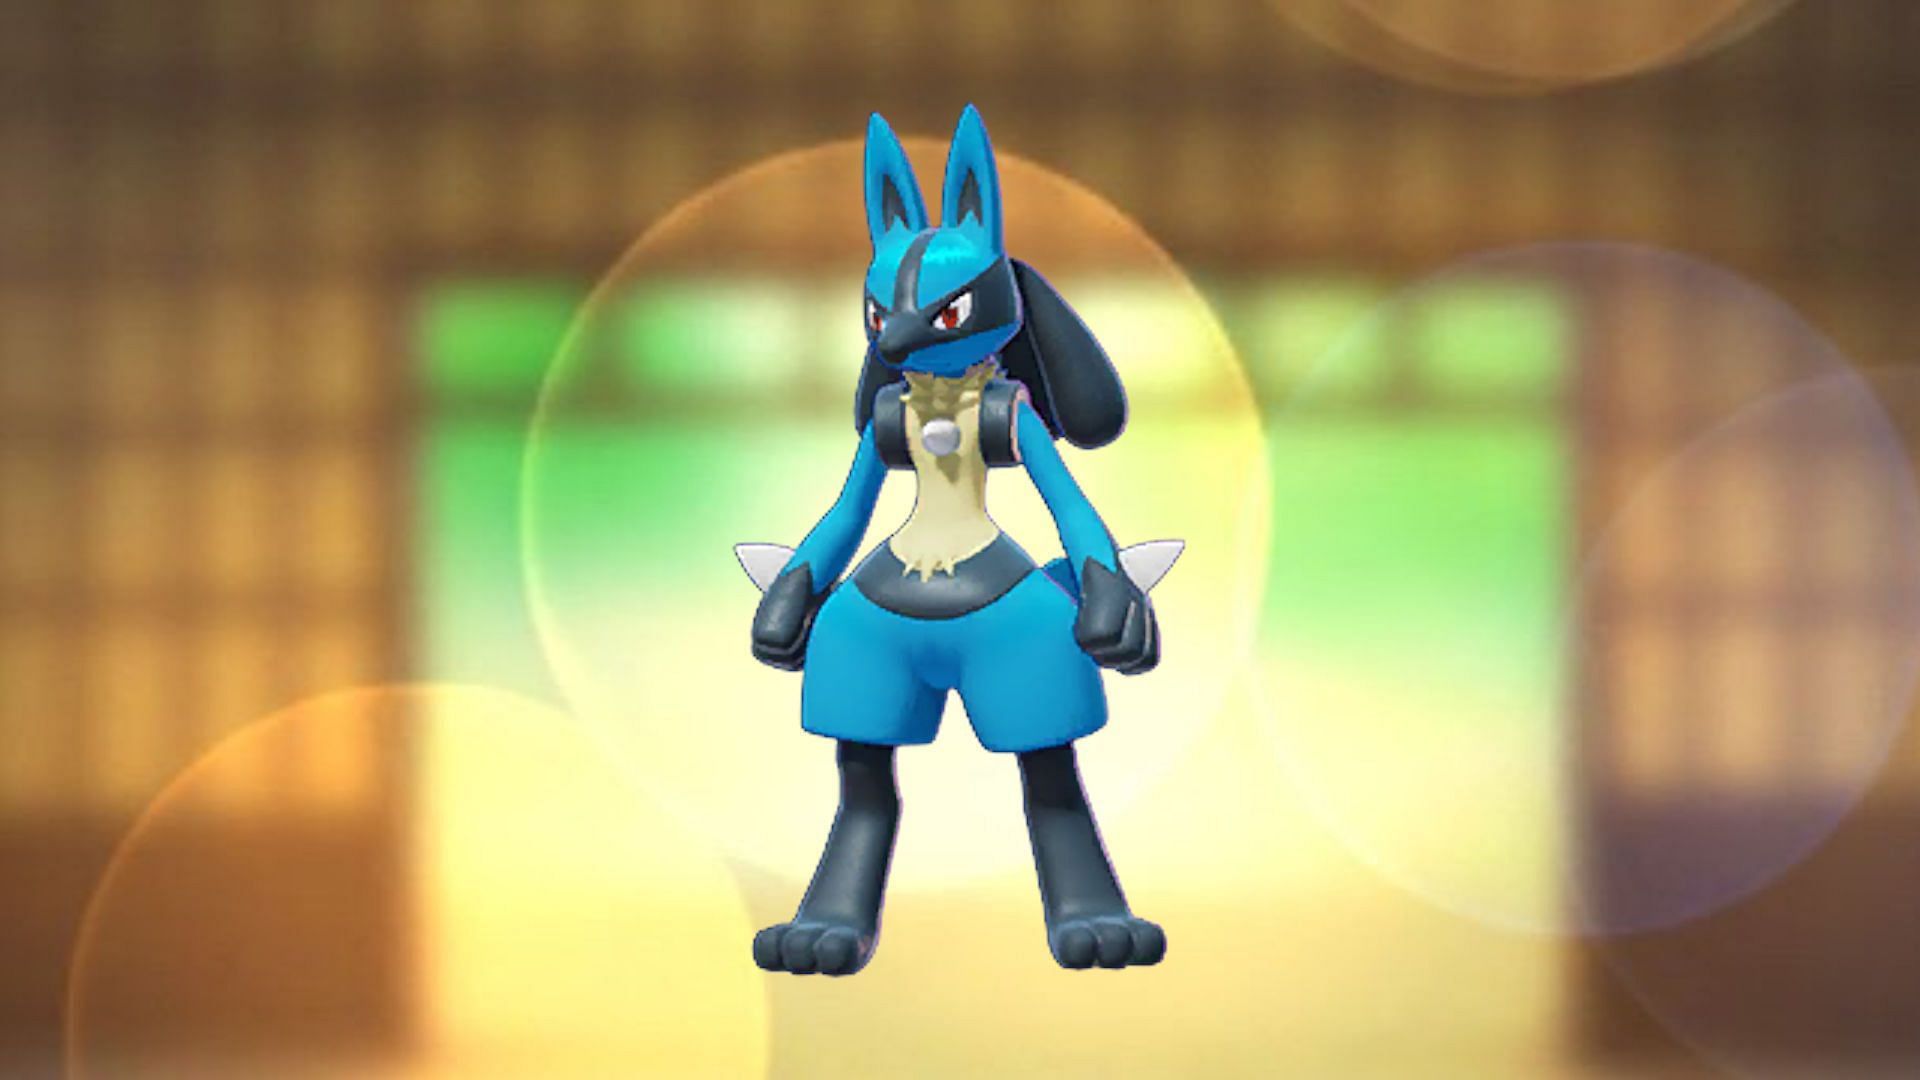 A Fighting-type like Lucario can effectively counter Glaceon in Pokemon GO (Image via The Pokemon Company)